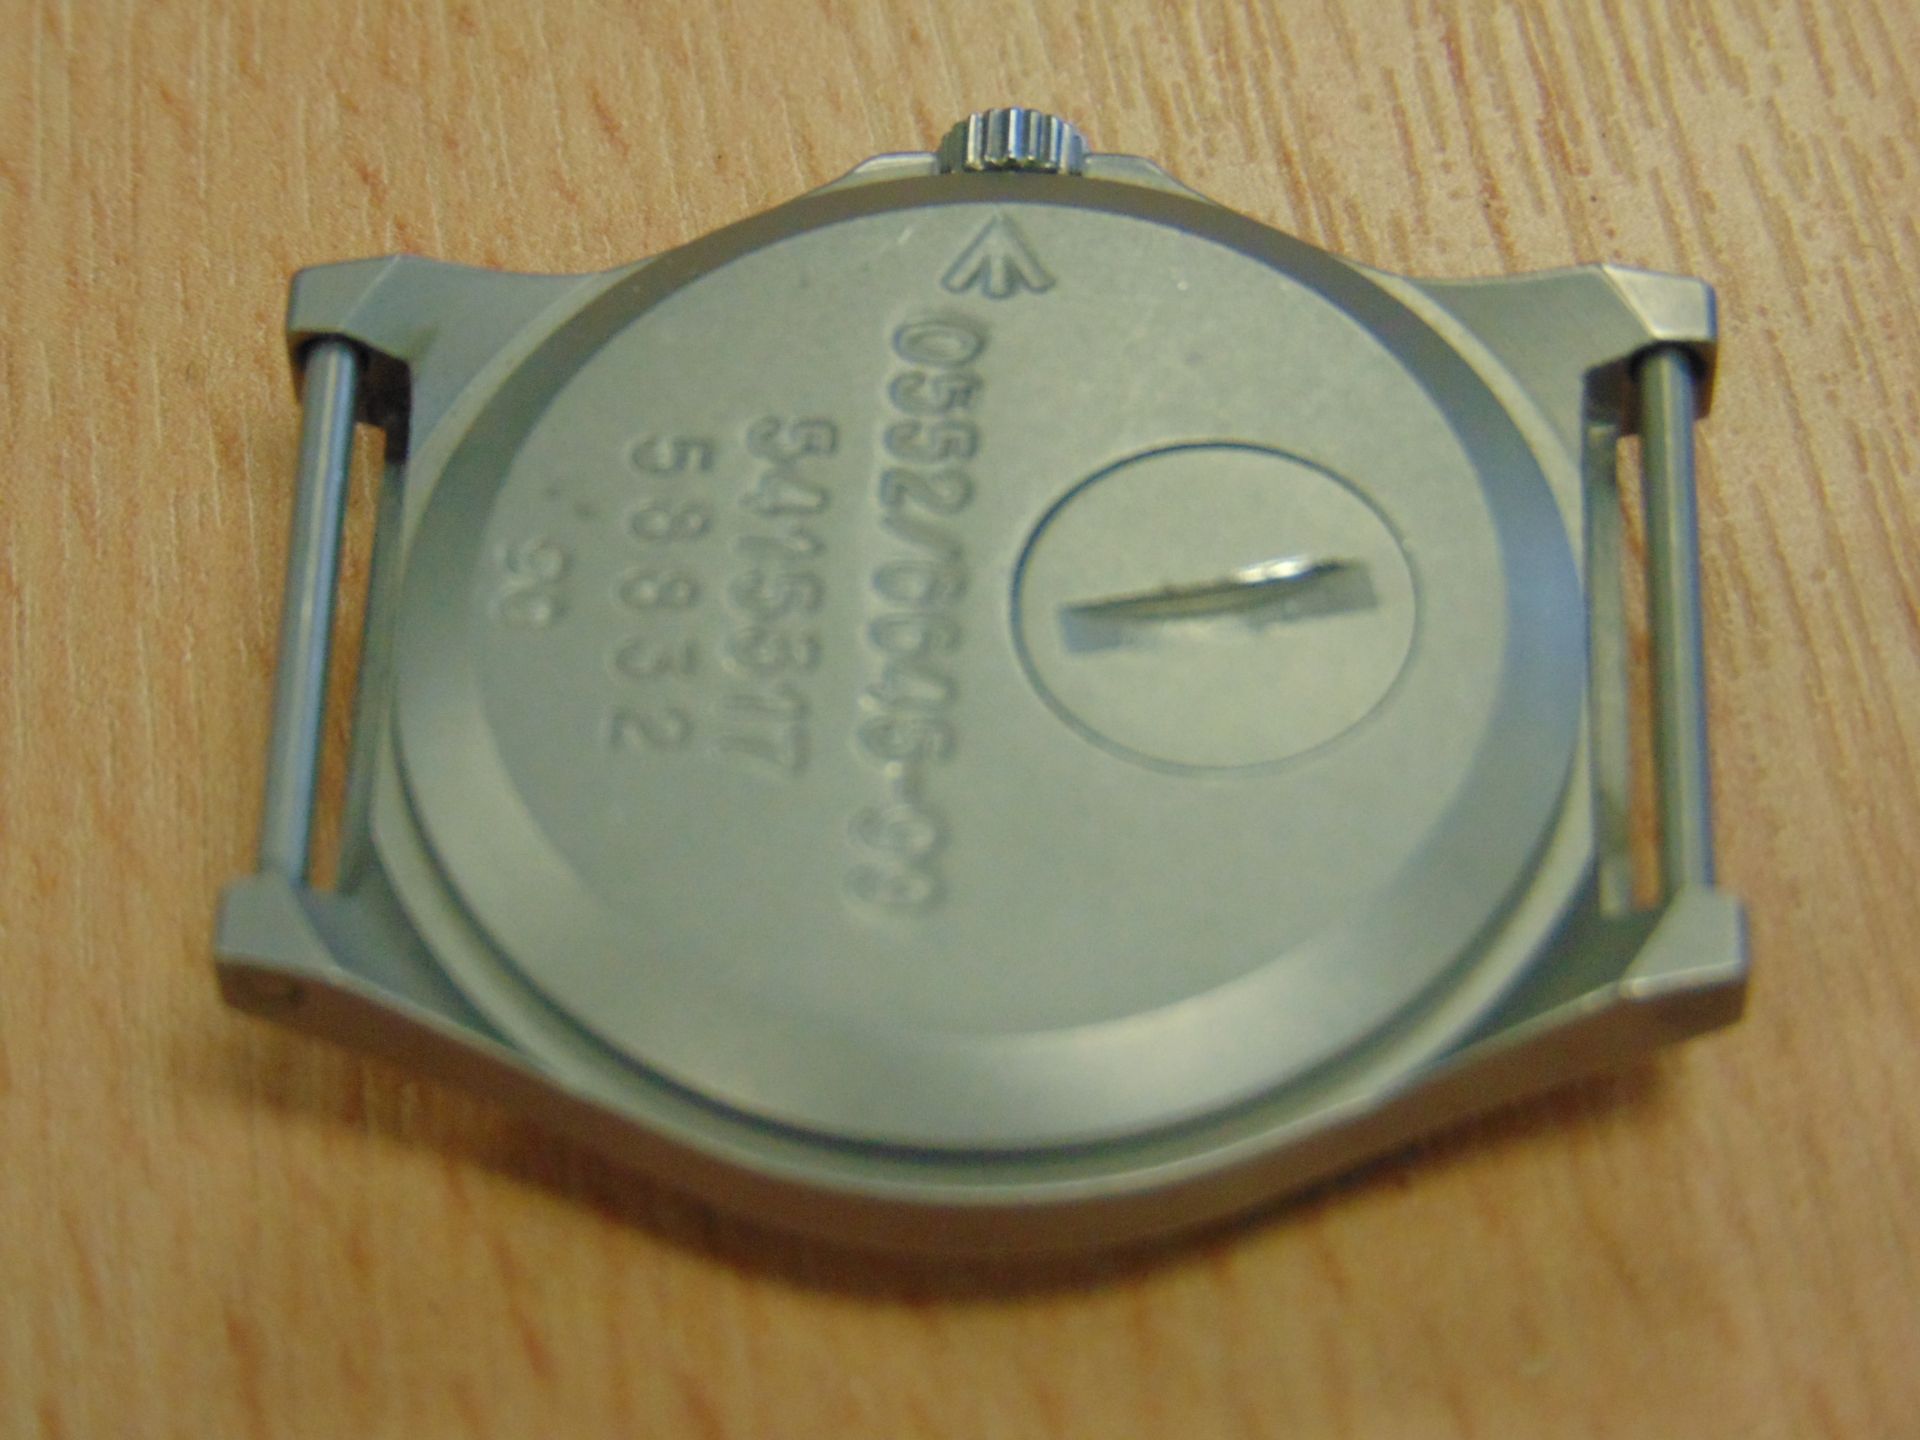 Unissued CWC QUARTZ ROYAL MARINES/NAVY Issue Service WATCH. Dated 1990 - GULF WAR - Image 6 of 8